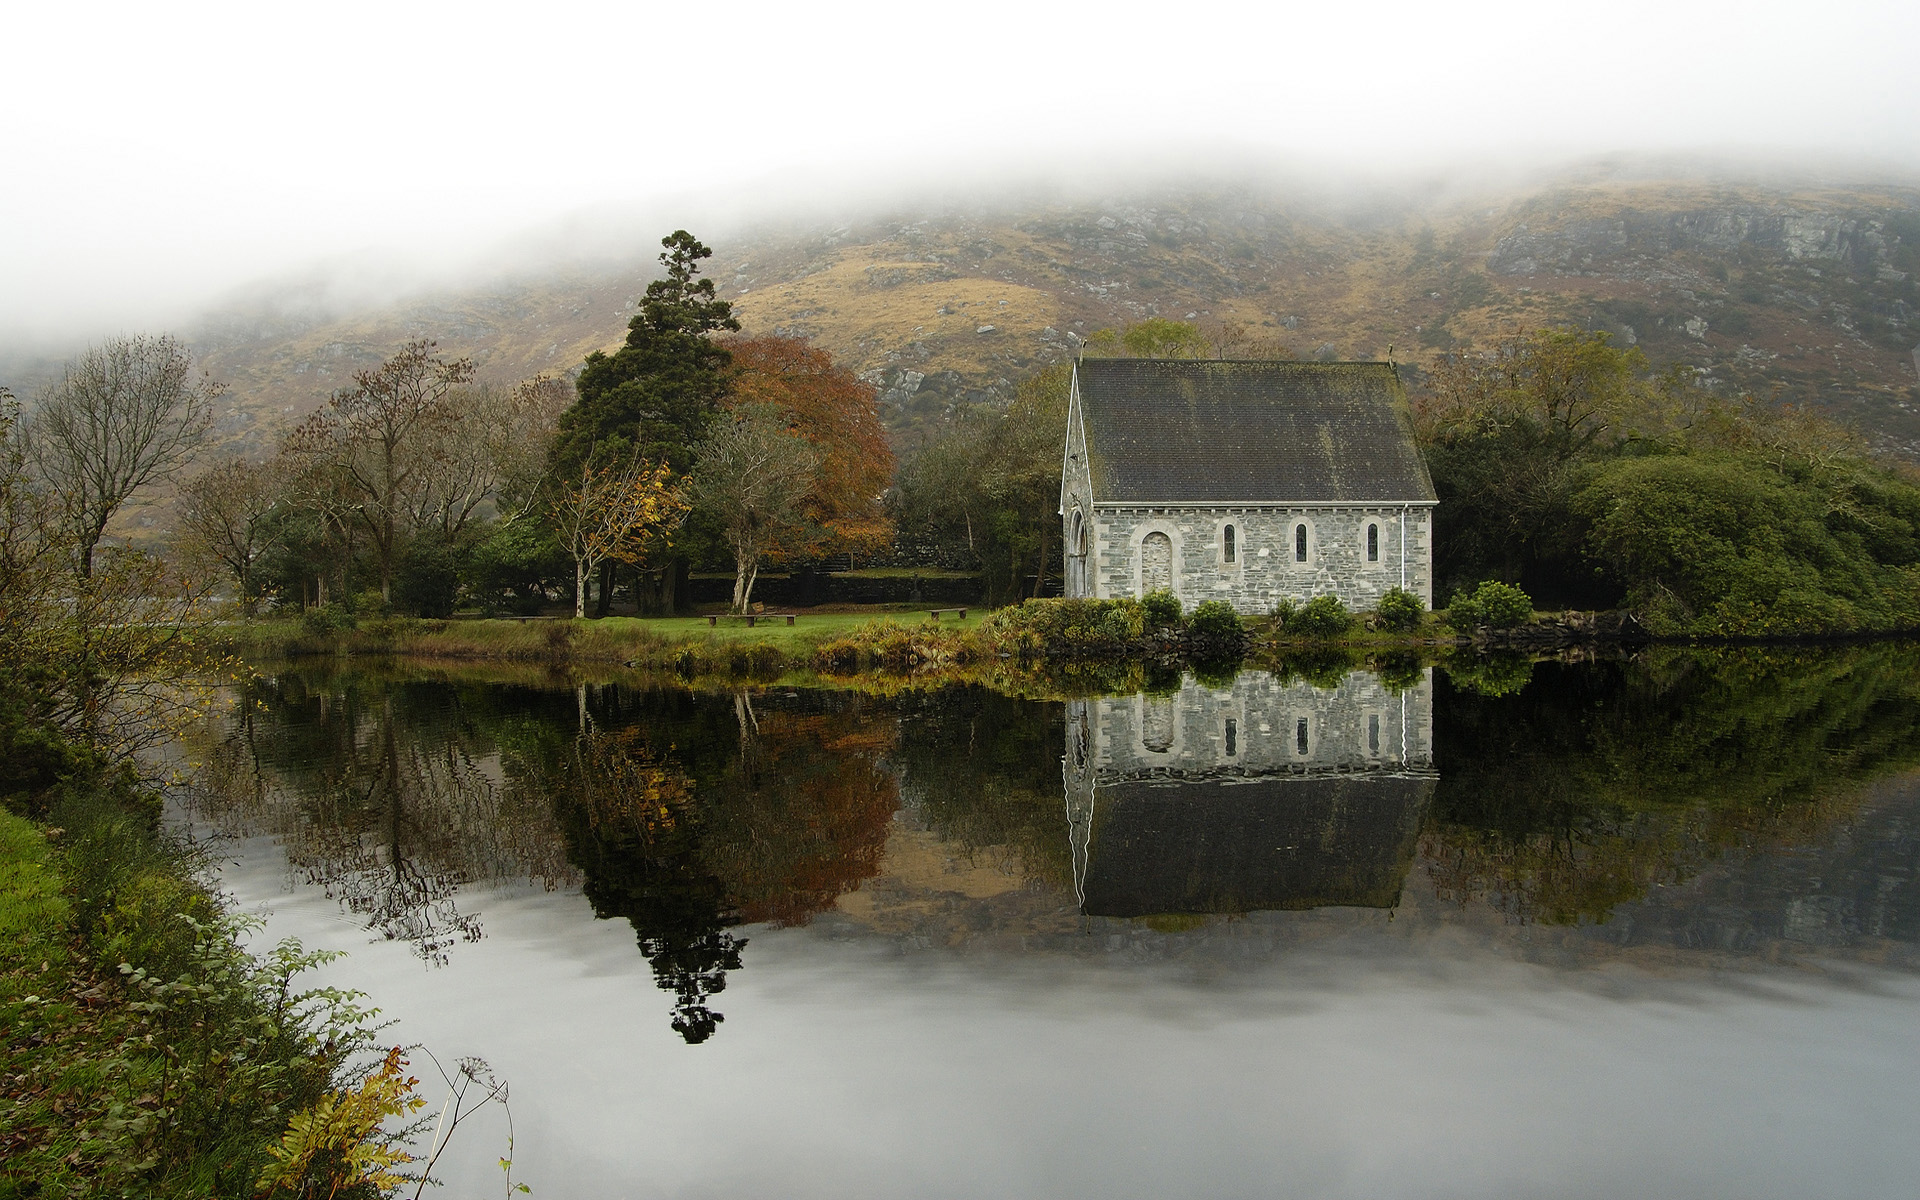 Gougane Barra wallpapers and images   wallpapers pictures photos 1920x1200